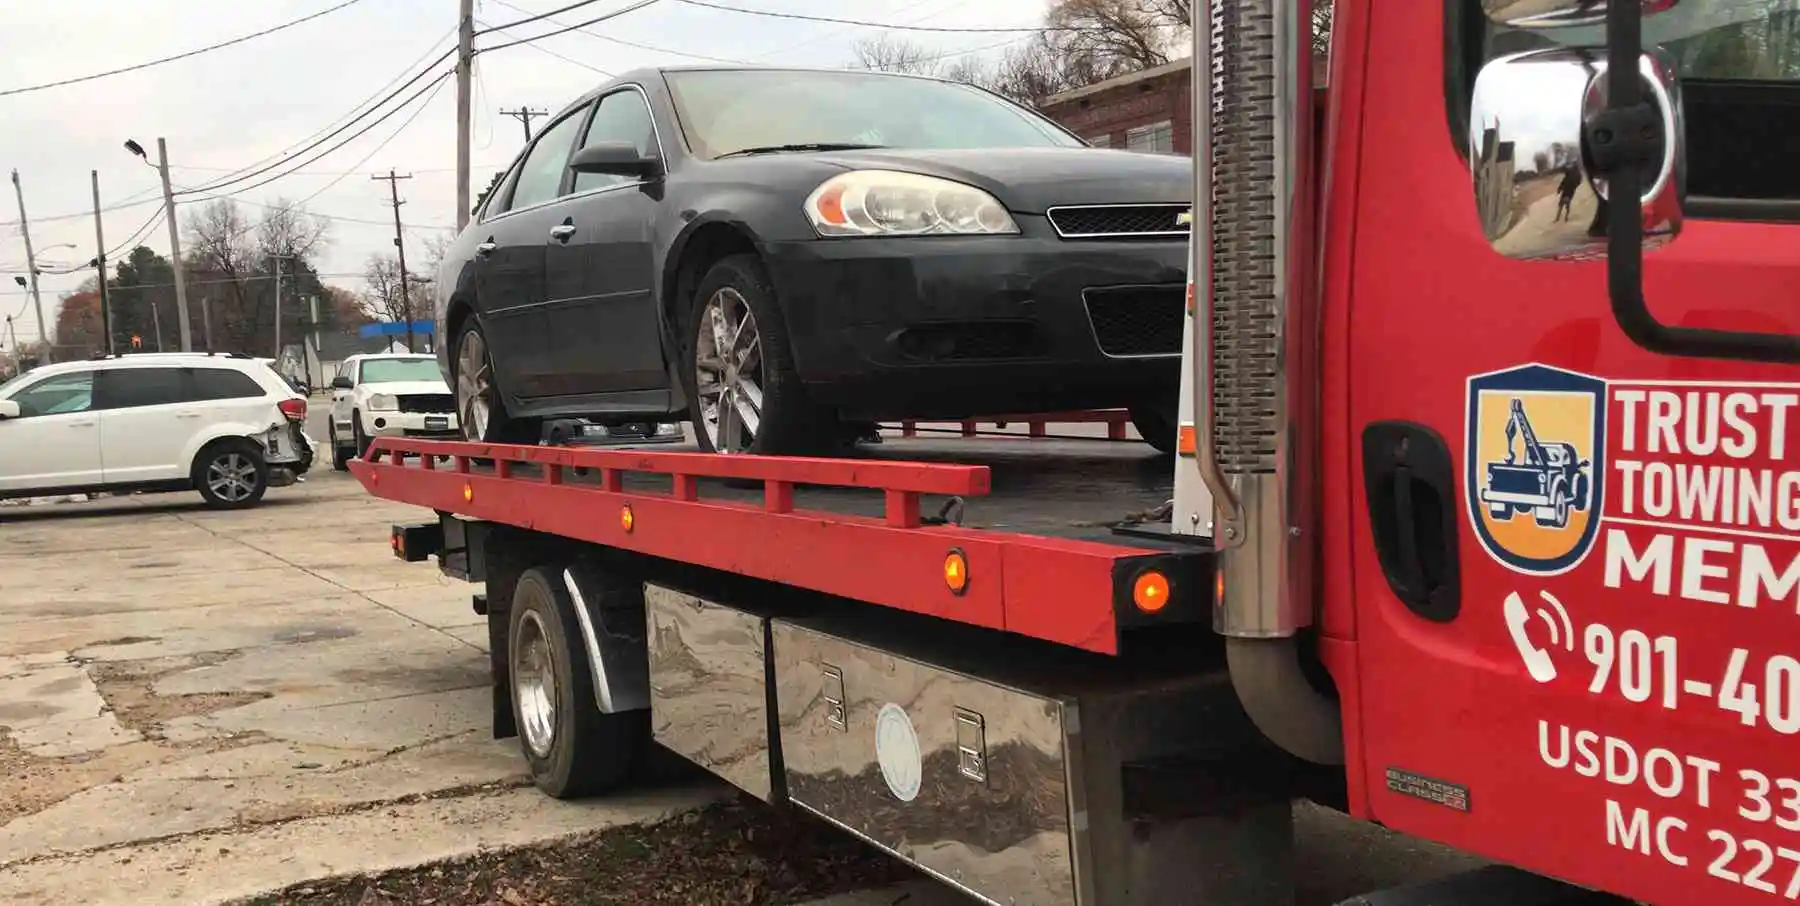 You are currently viewing Tread Carefully: Can a Tow Service Damage Your Car?